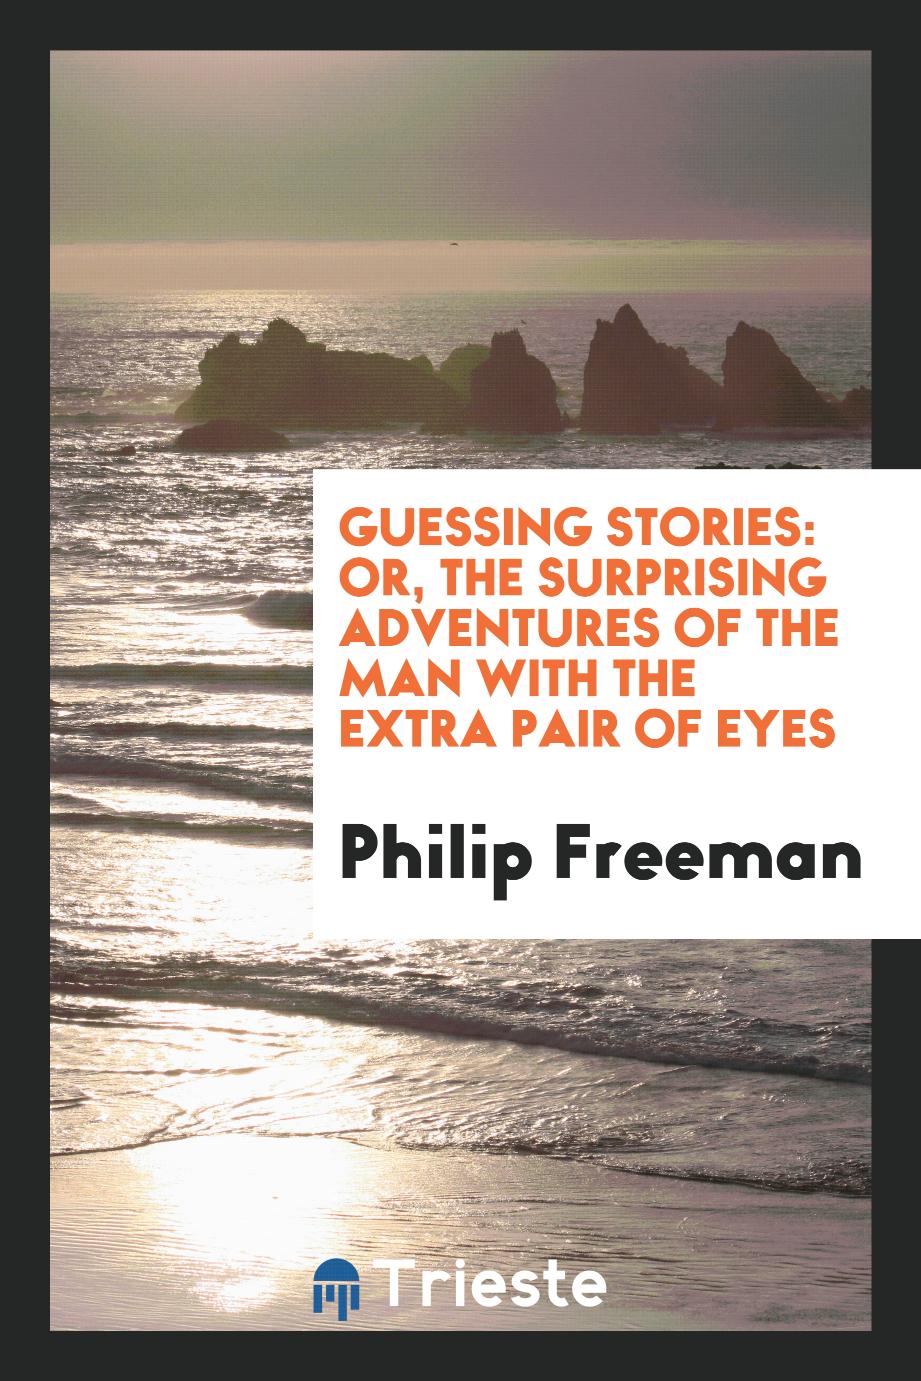 Guessing Stories: or, The Surprising Adventures of the Man With the Extra Pair of Eyes